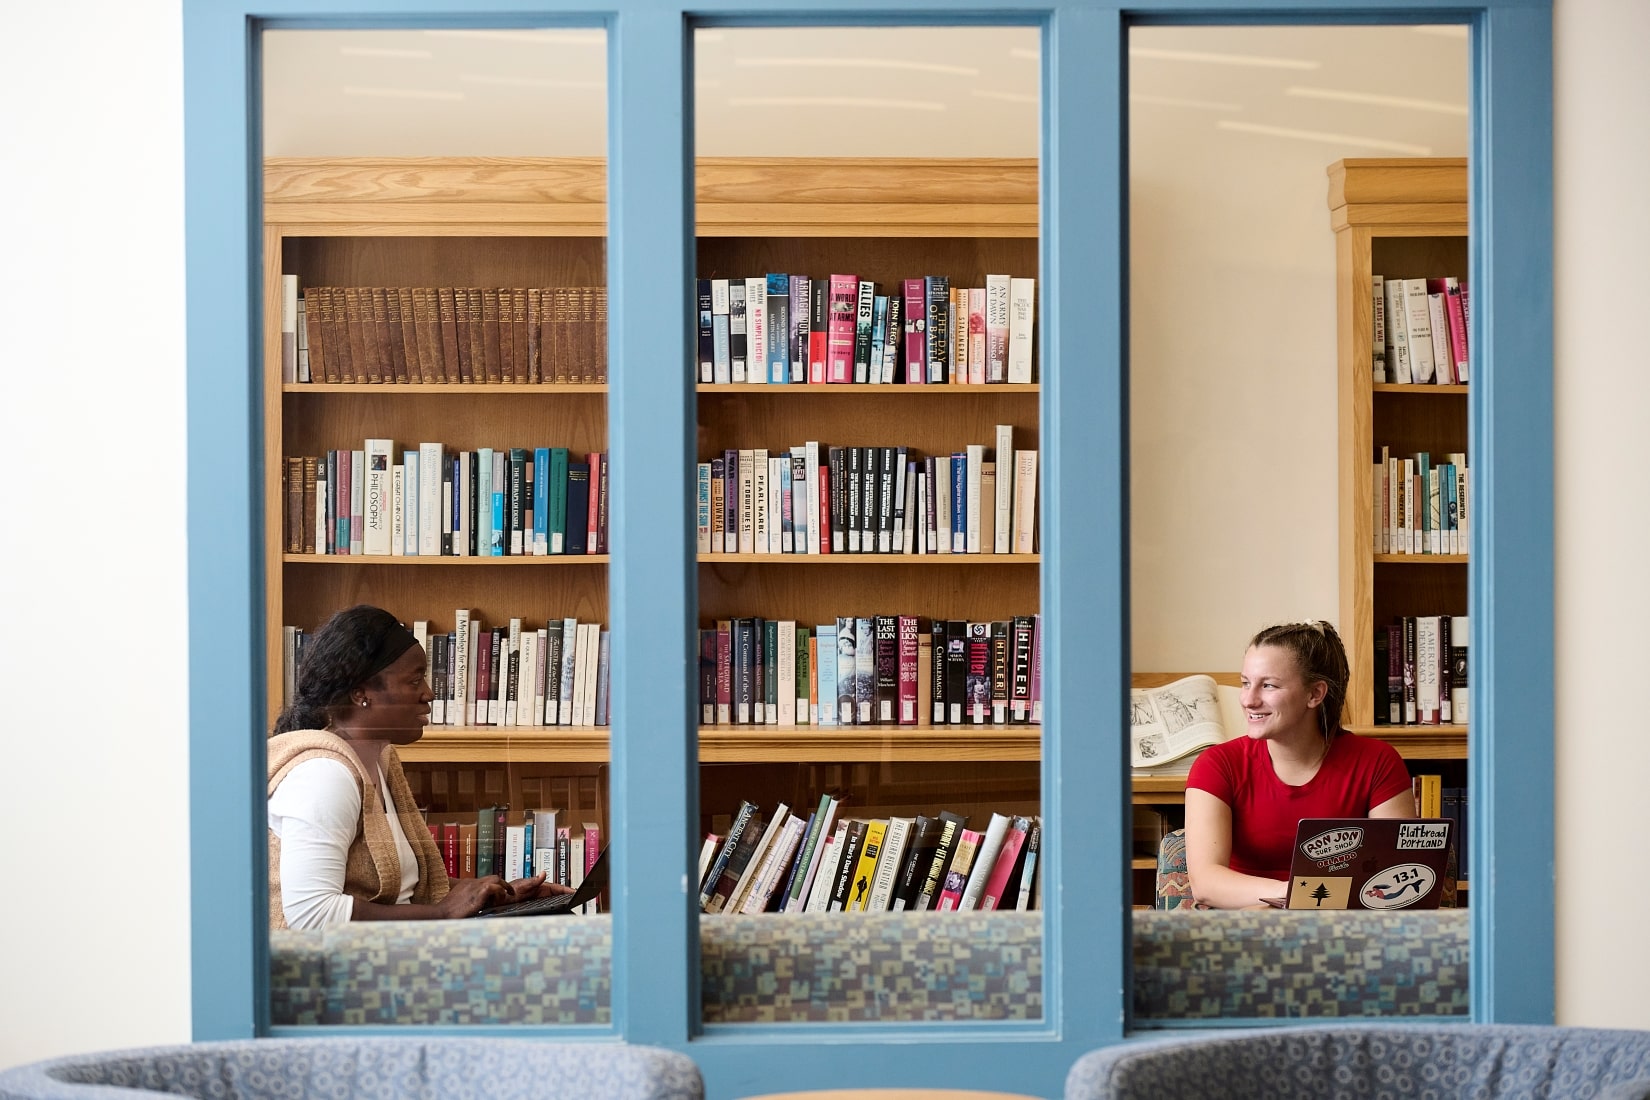 View through a window of a two women talking to each other while sitting in a library.